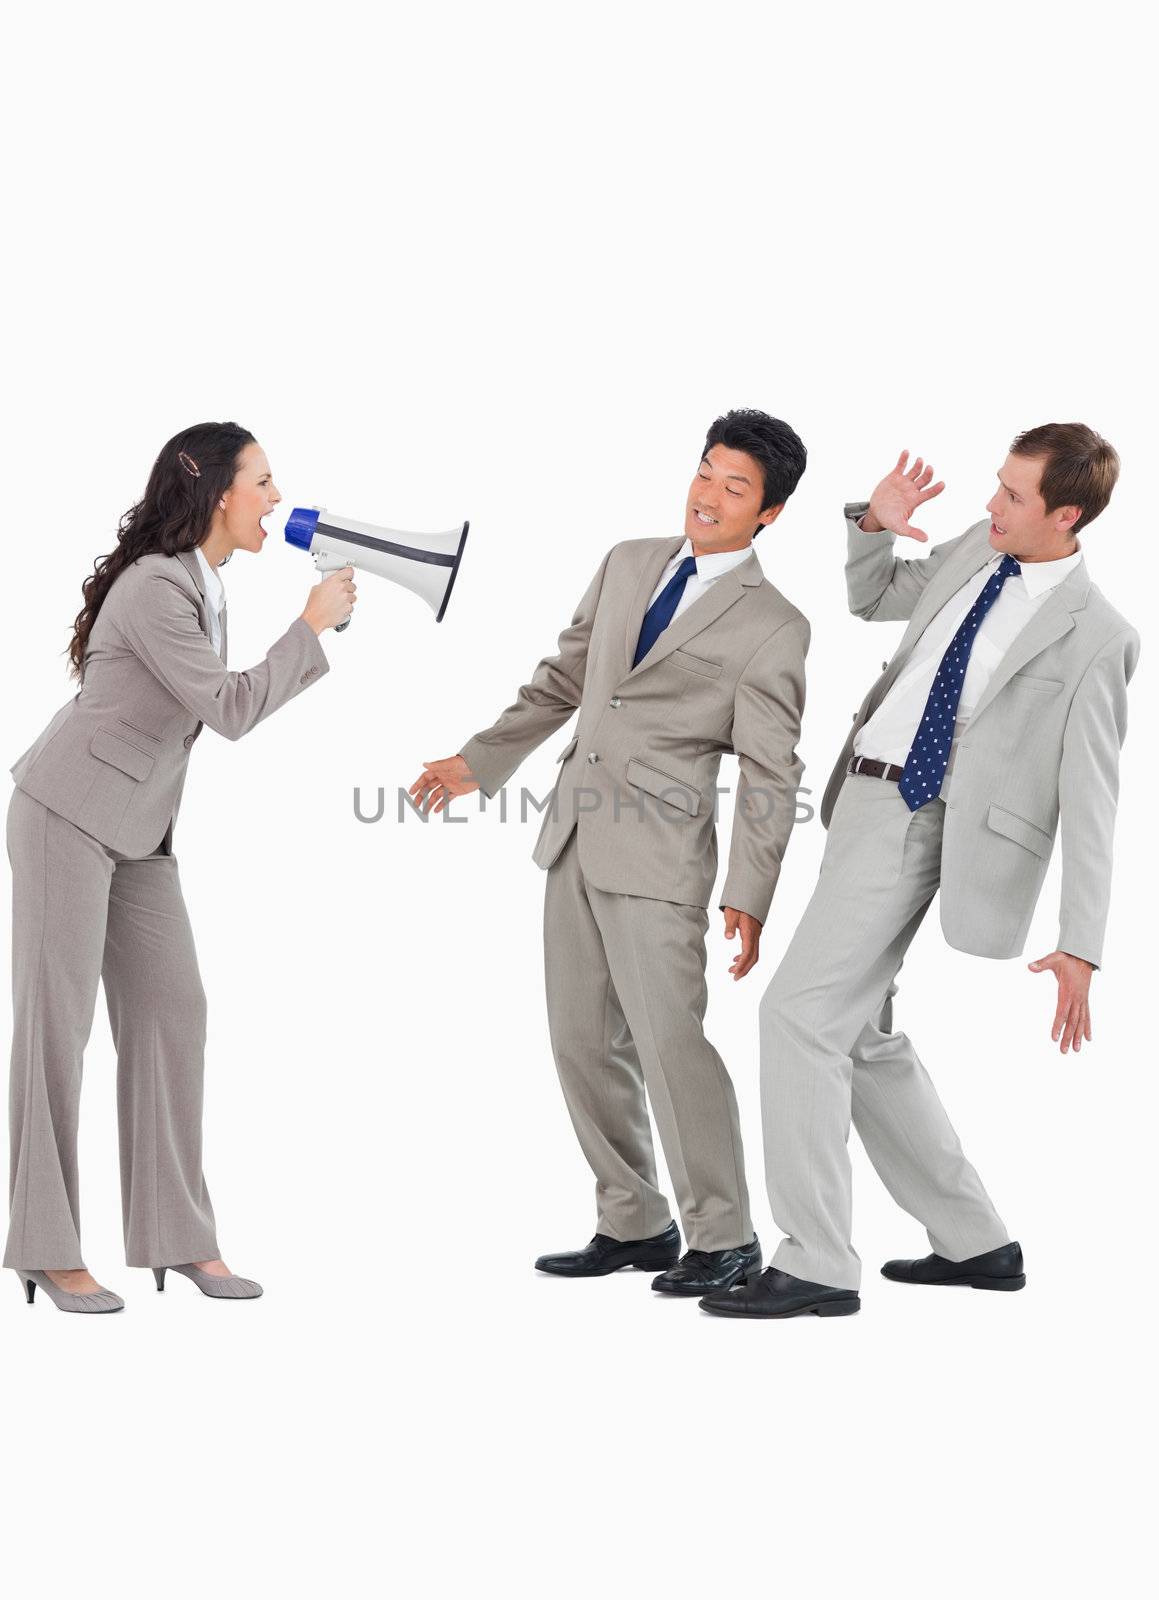 Saleswoman with megaphone yelling at colleagues by Wavebreakmedia